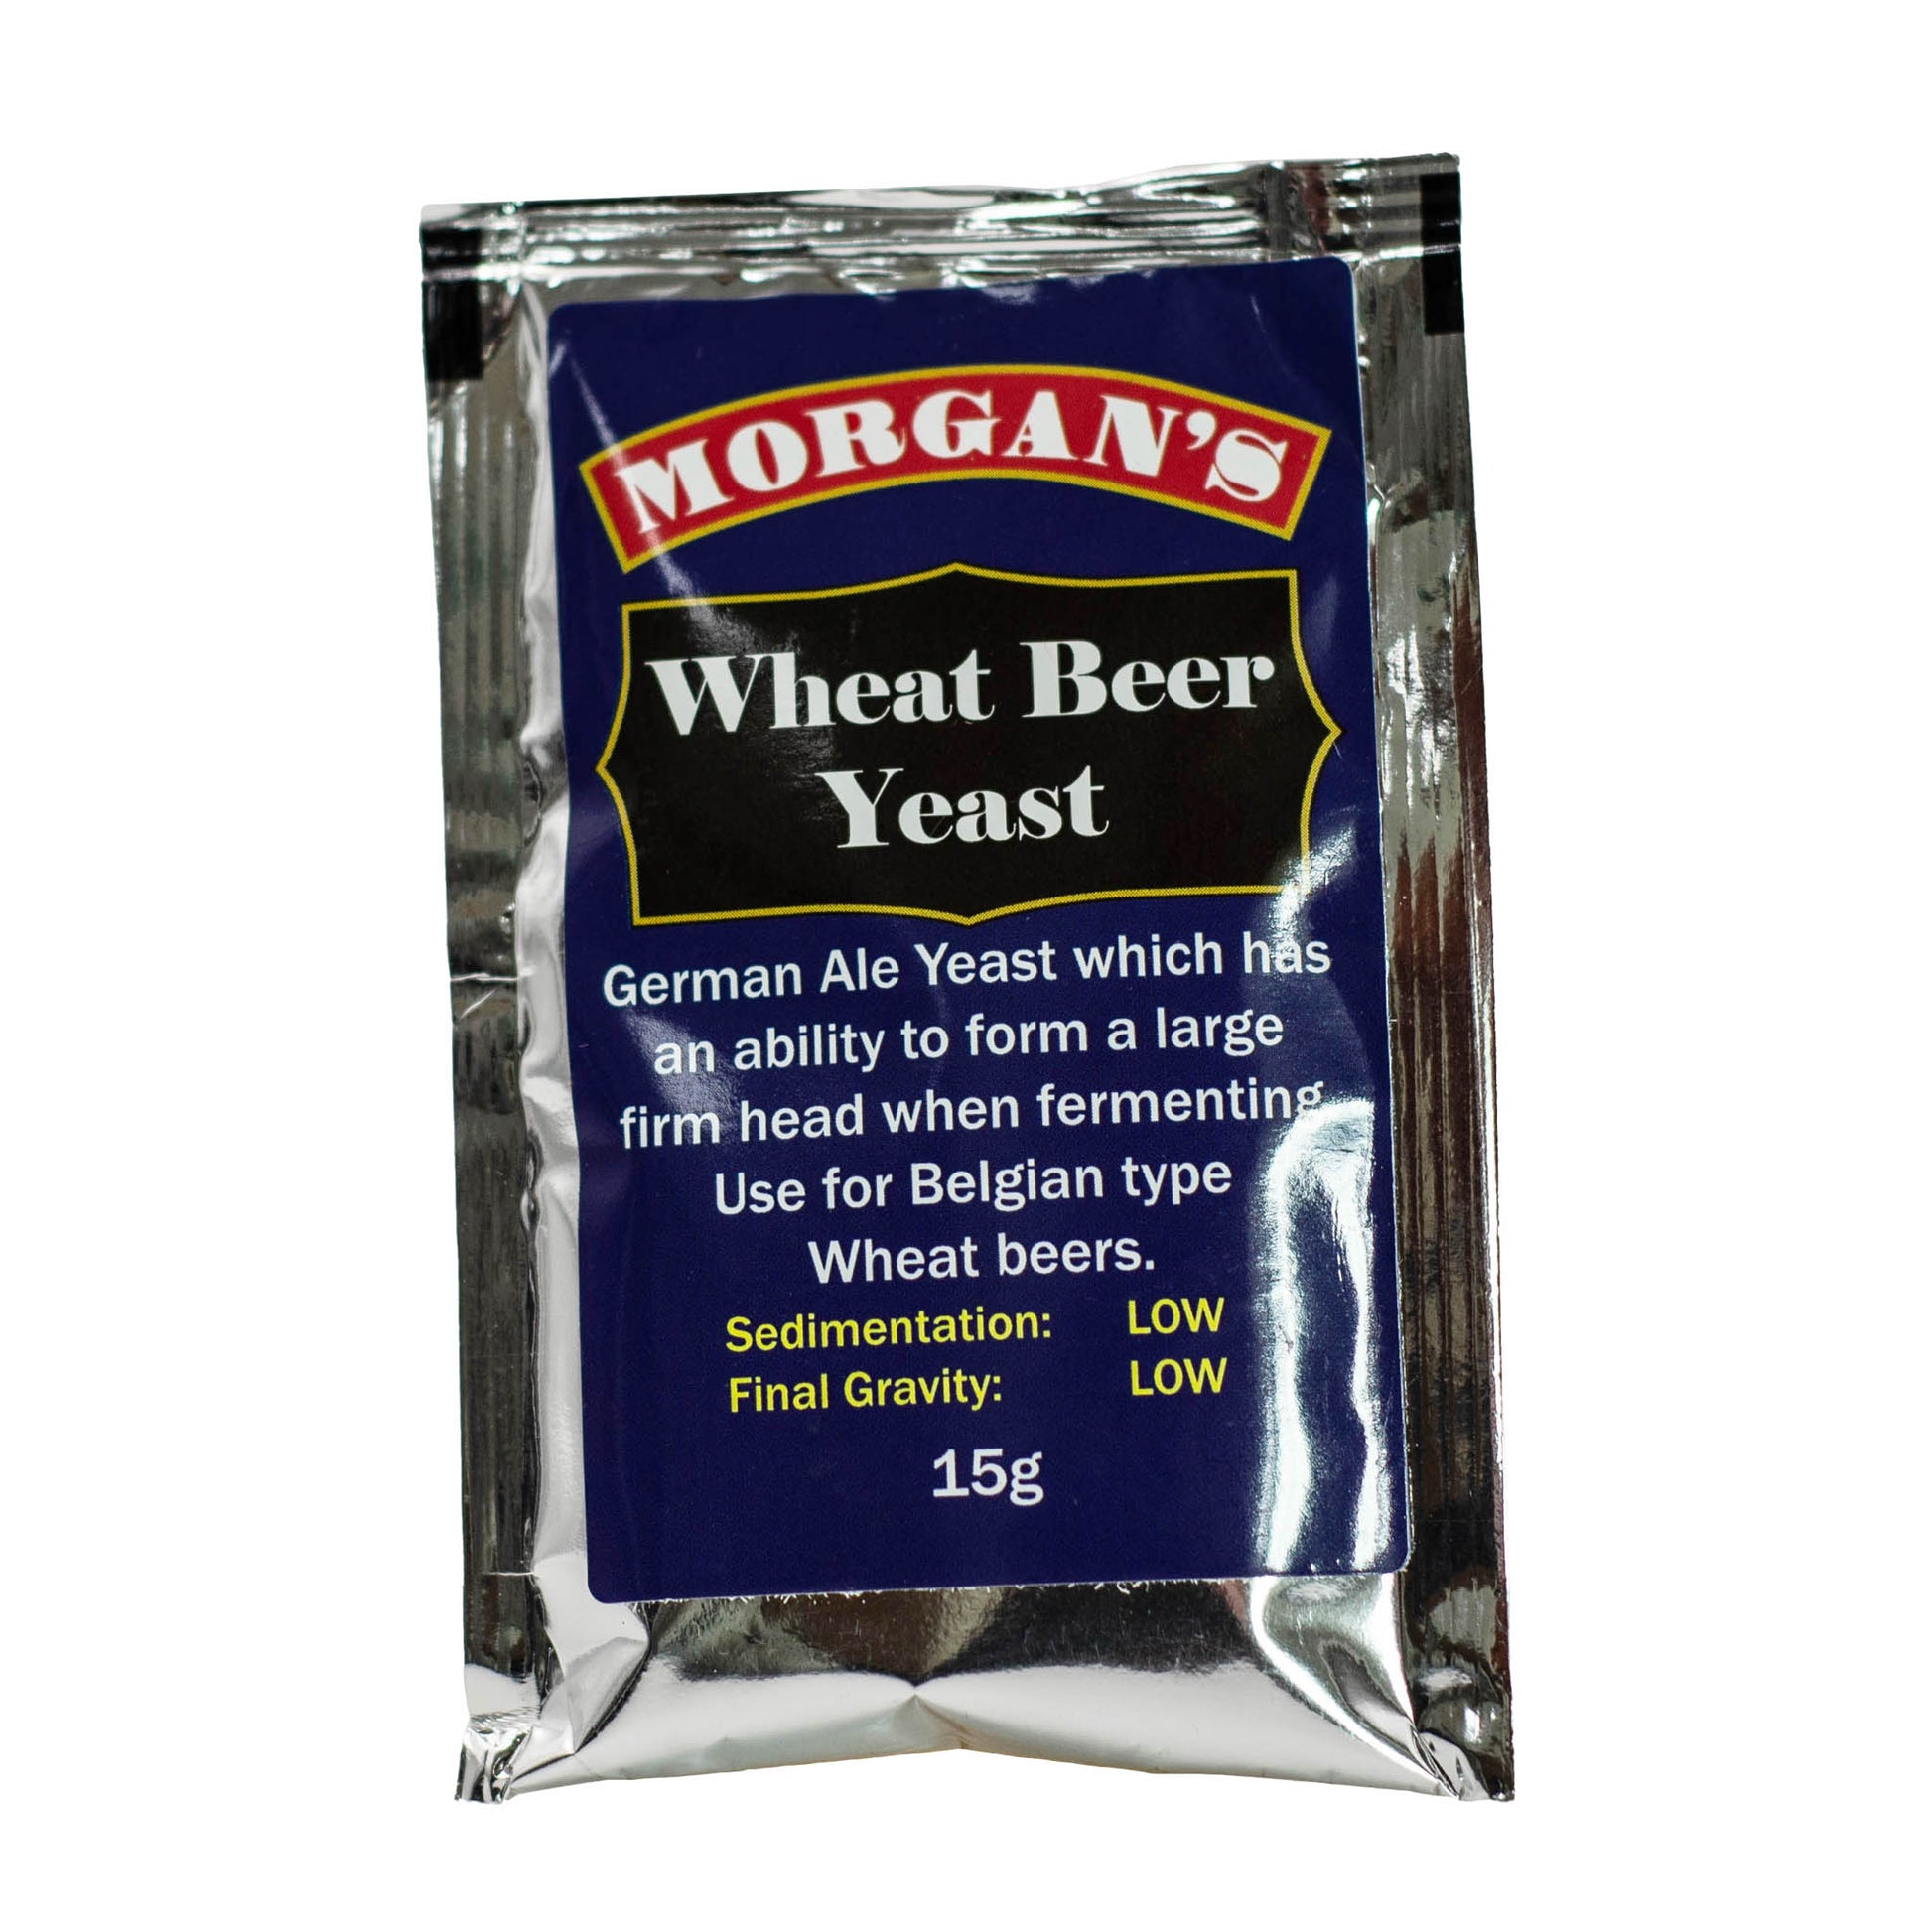 15g packet of Brew Cellar Wheat Beer yeast